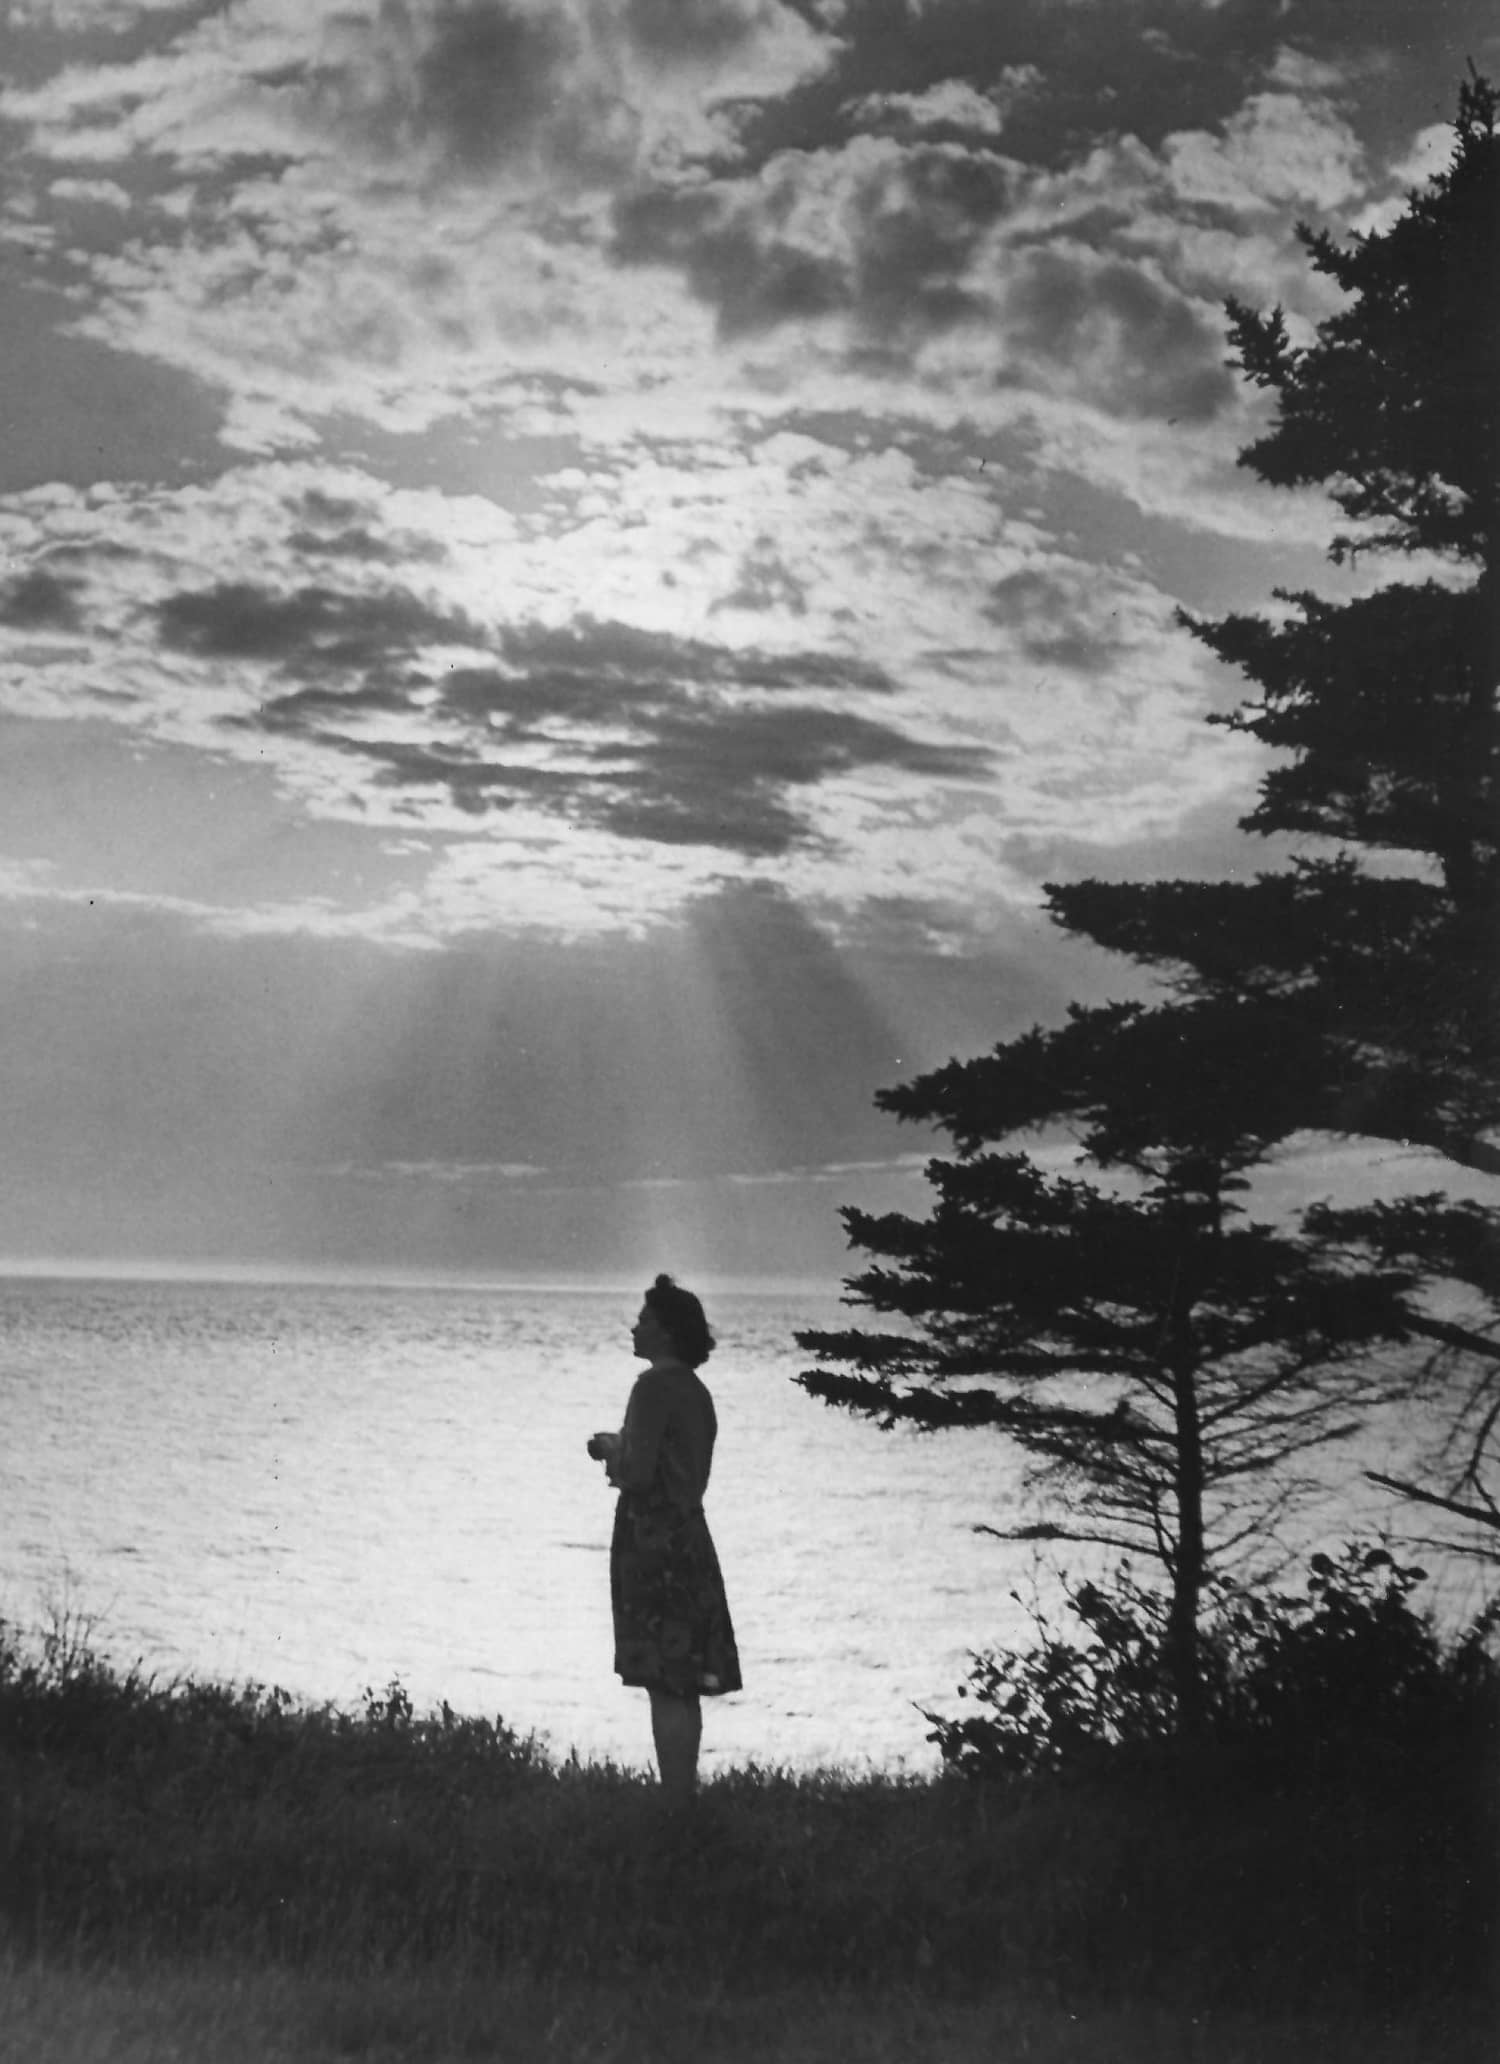 Wide shot of Thelma Pepper, silhouette with beautiful sky and lake in background.